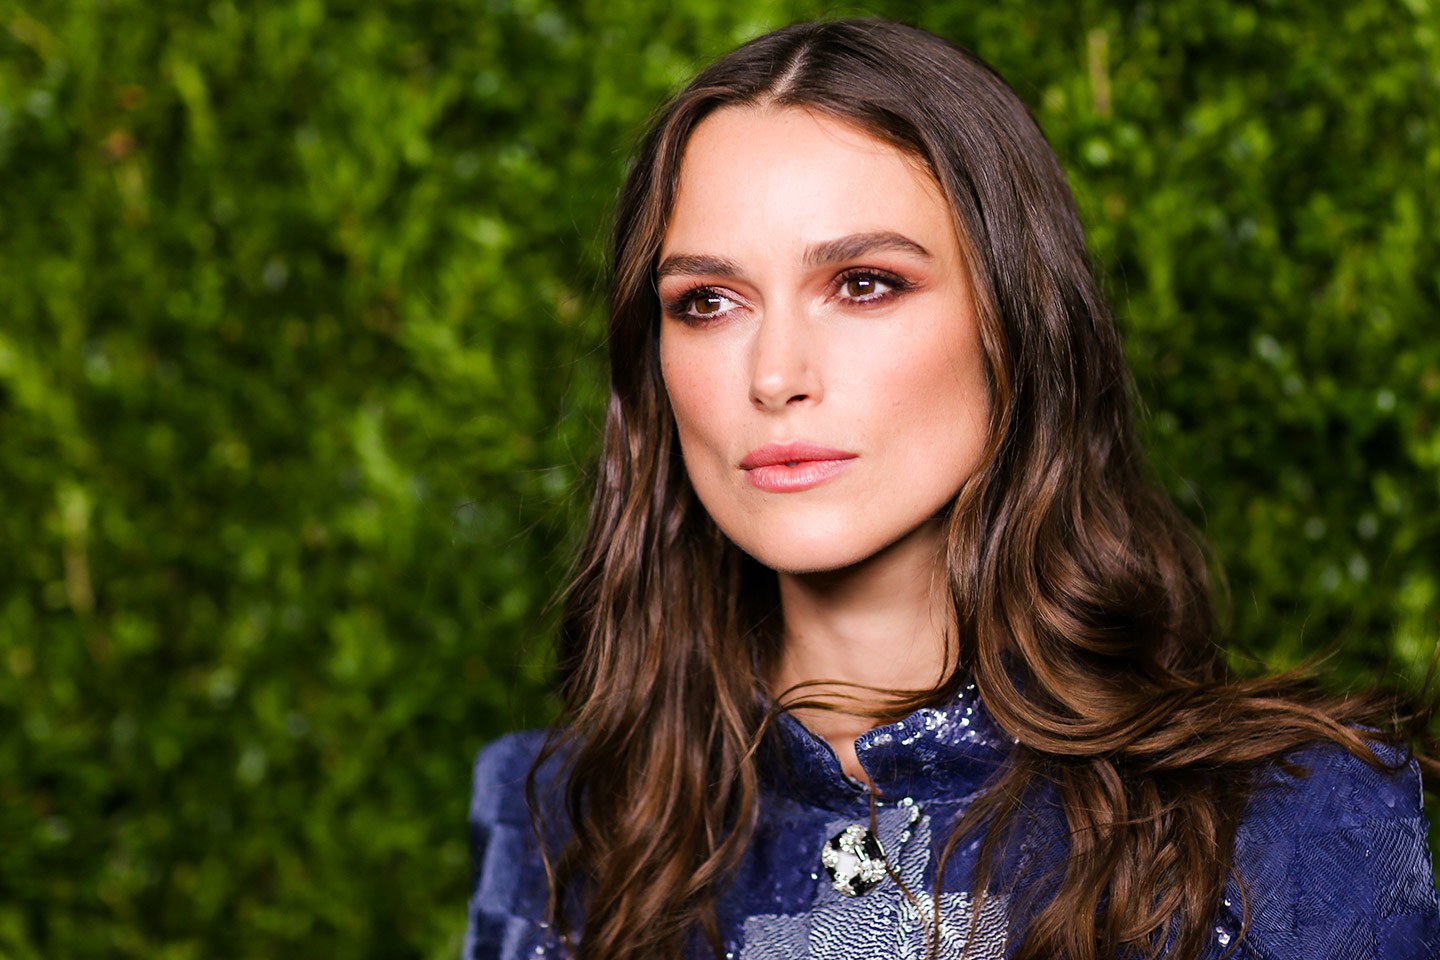 Make Some Impossible “Actress Vs. Character” Choices and We’ll Guess Your Exact Age and Height Keira Knightley